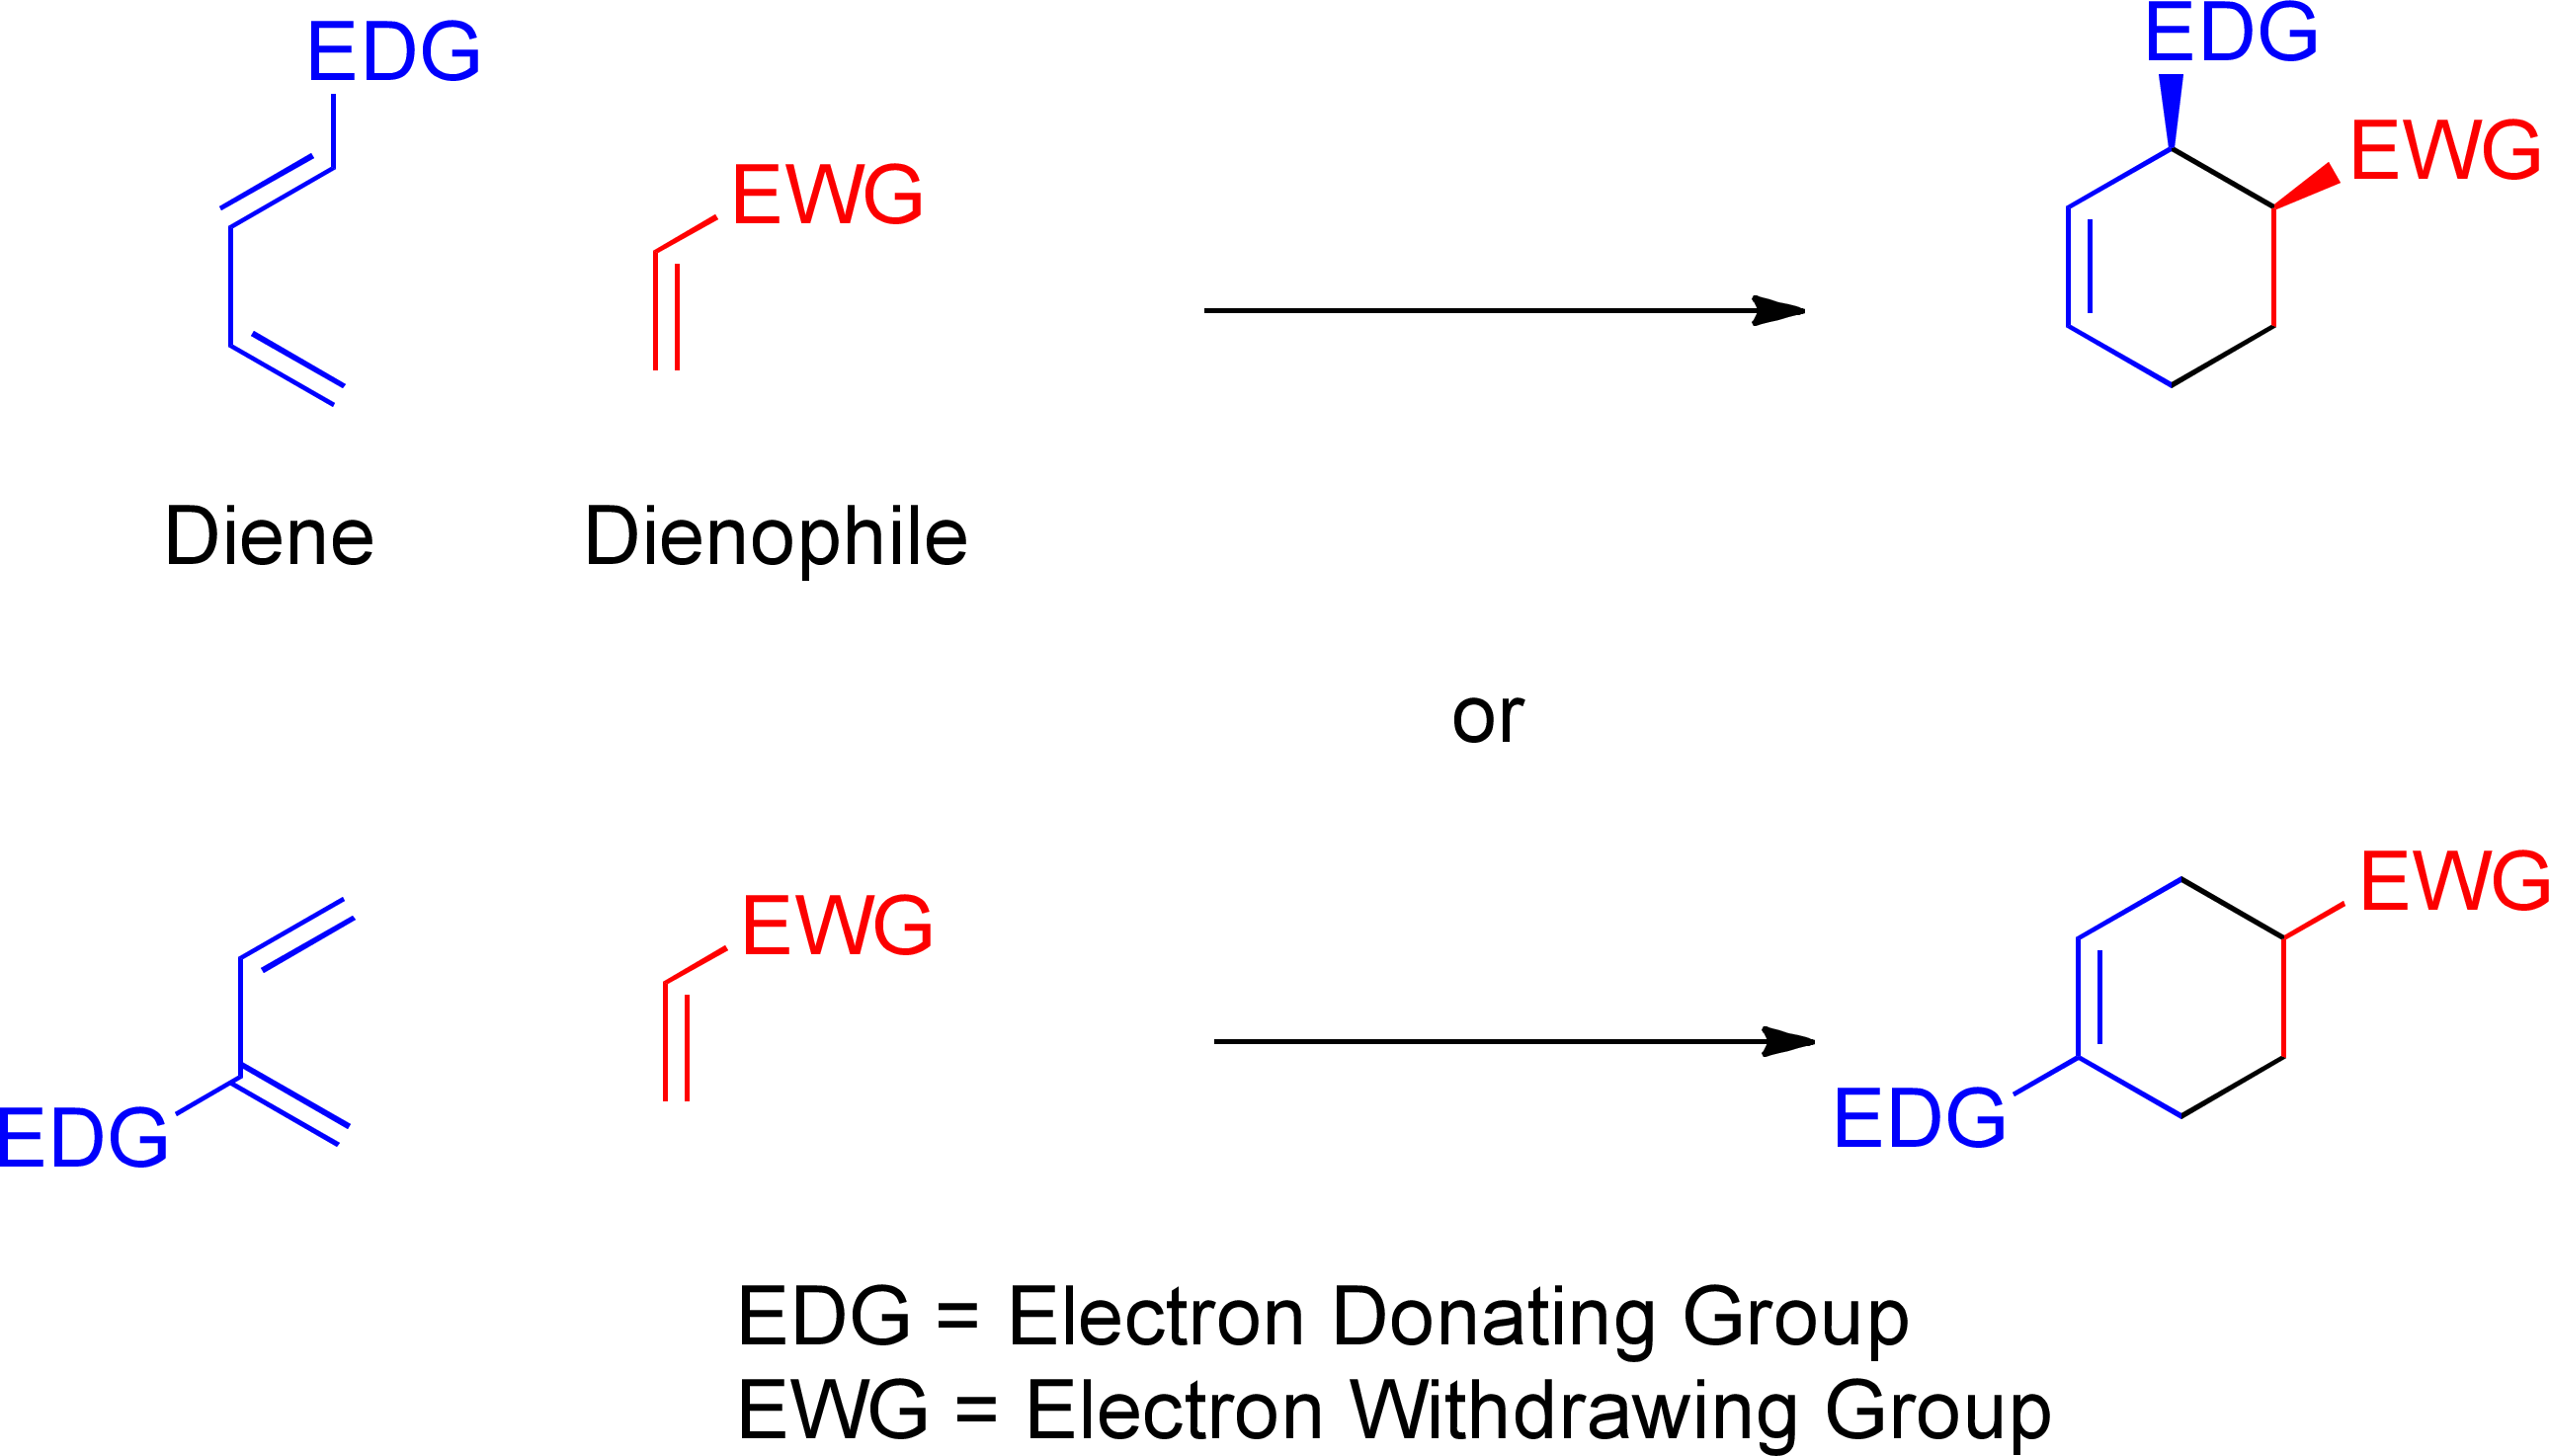 Generic Diels-Alder cyclization of dienes with alkenes to form a cyclohexene.  If the electron-donating group is on the 1-position of the diene, it and the electron-withdrawing group on the alkene wind up at the 3- and 4-position, respectively, in the cyclohexene.  If the EDG is on the 2-position of the diene, it and the EWG from the alkene wind up on the 1- and 4-positions, respectively.